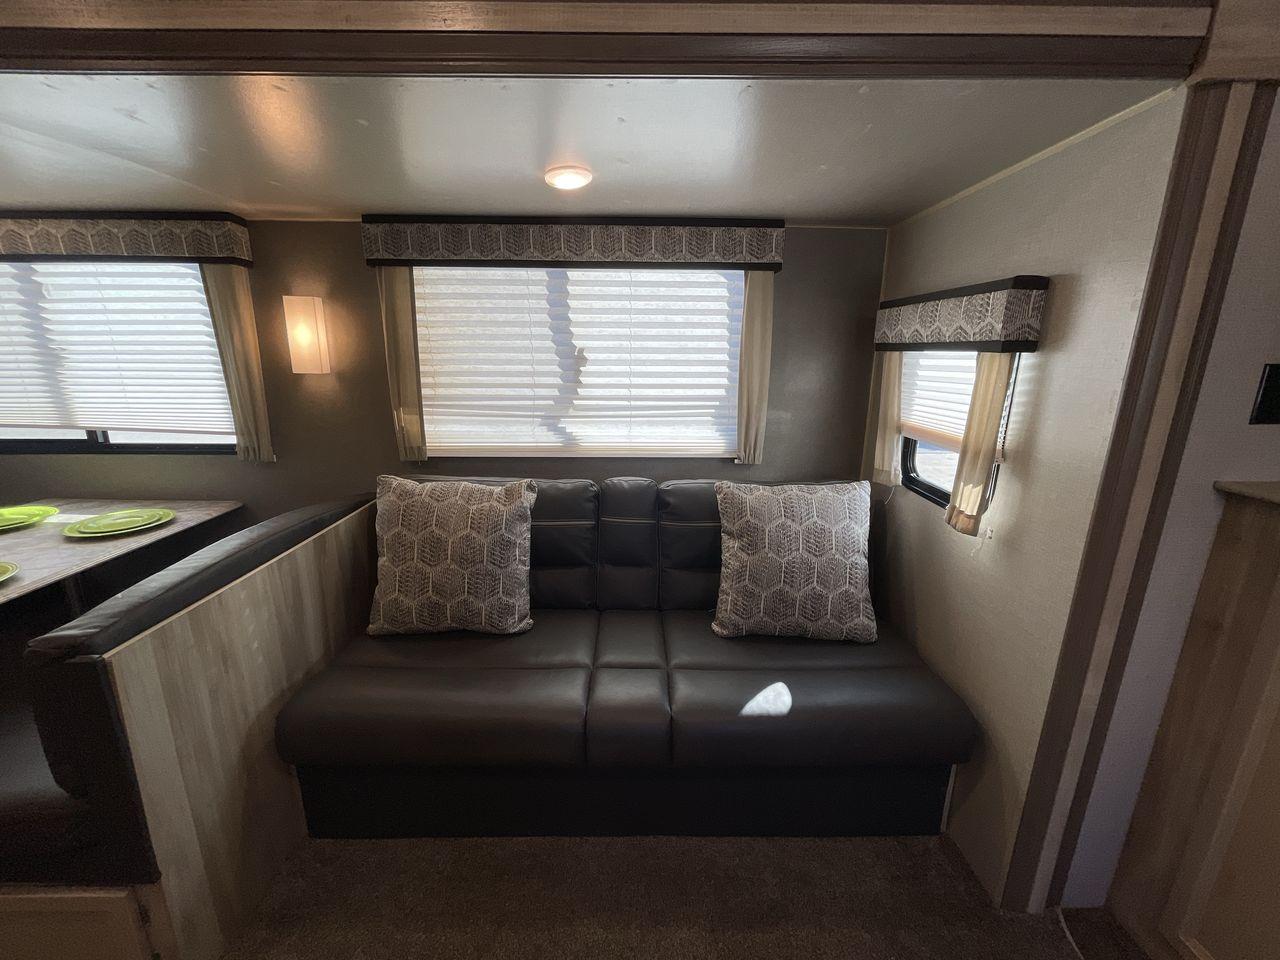 2021 COACHMEN CATALINA 243RBS (5ZT2CANBXMU) , Length: 28.75 ft. | Dry Weight: 5,692 lbs. | Gross Weight: 7,600 lbs. | Slides: 1 transmission, located at 4319 N Main St, Cleburne, TX, 76033, (817) 678-5133, 32.385960, -97.391212 - The 2021 Forest River Catalina 243RBS travel trailer offers a spacious floorplan that is truly comfortable and convenient. As you enter the trailer, you will find a cozy front bedroom with a lovely queen bed where you can relax and rejuvenate yourself after enjoying the great outdoors. You also have - Photo #12